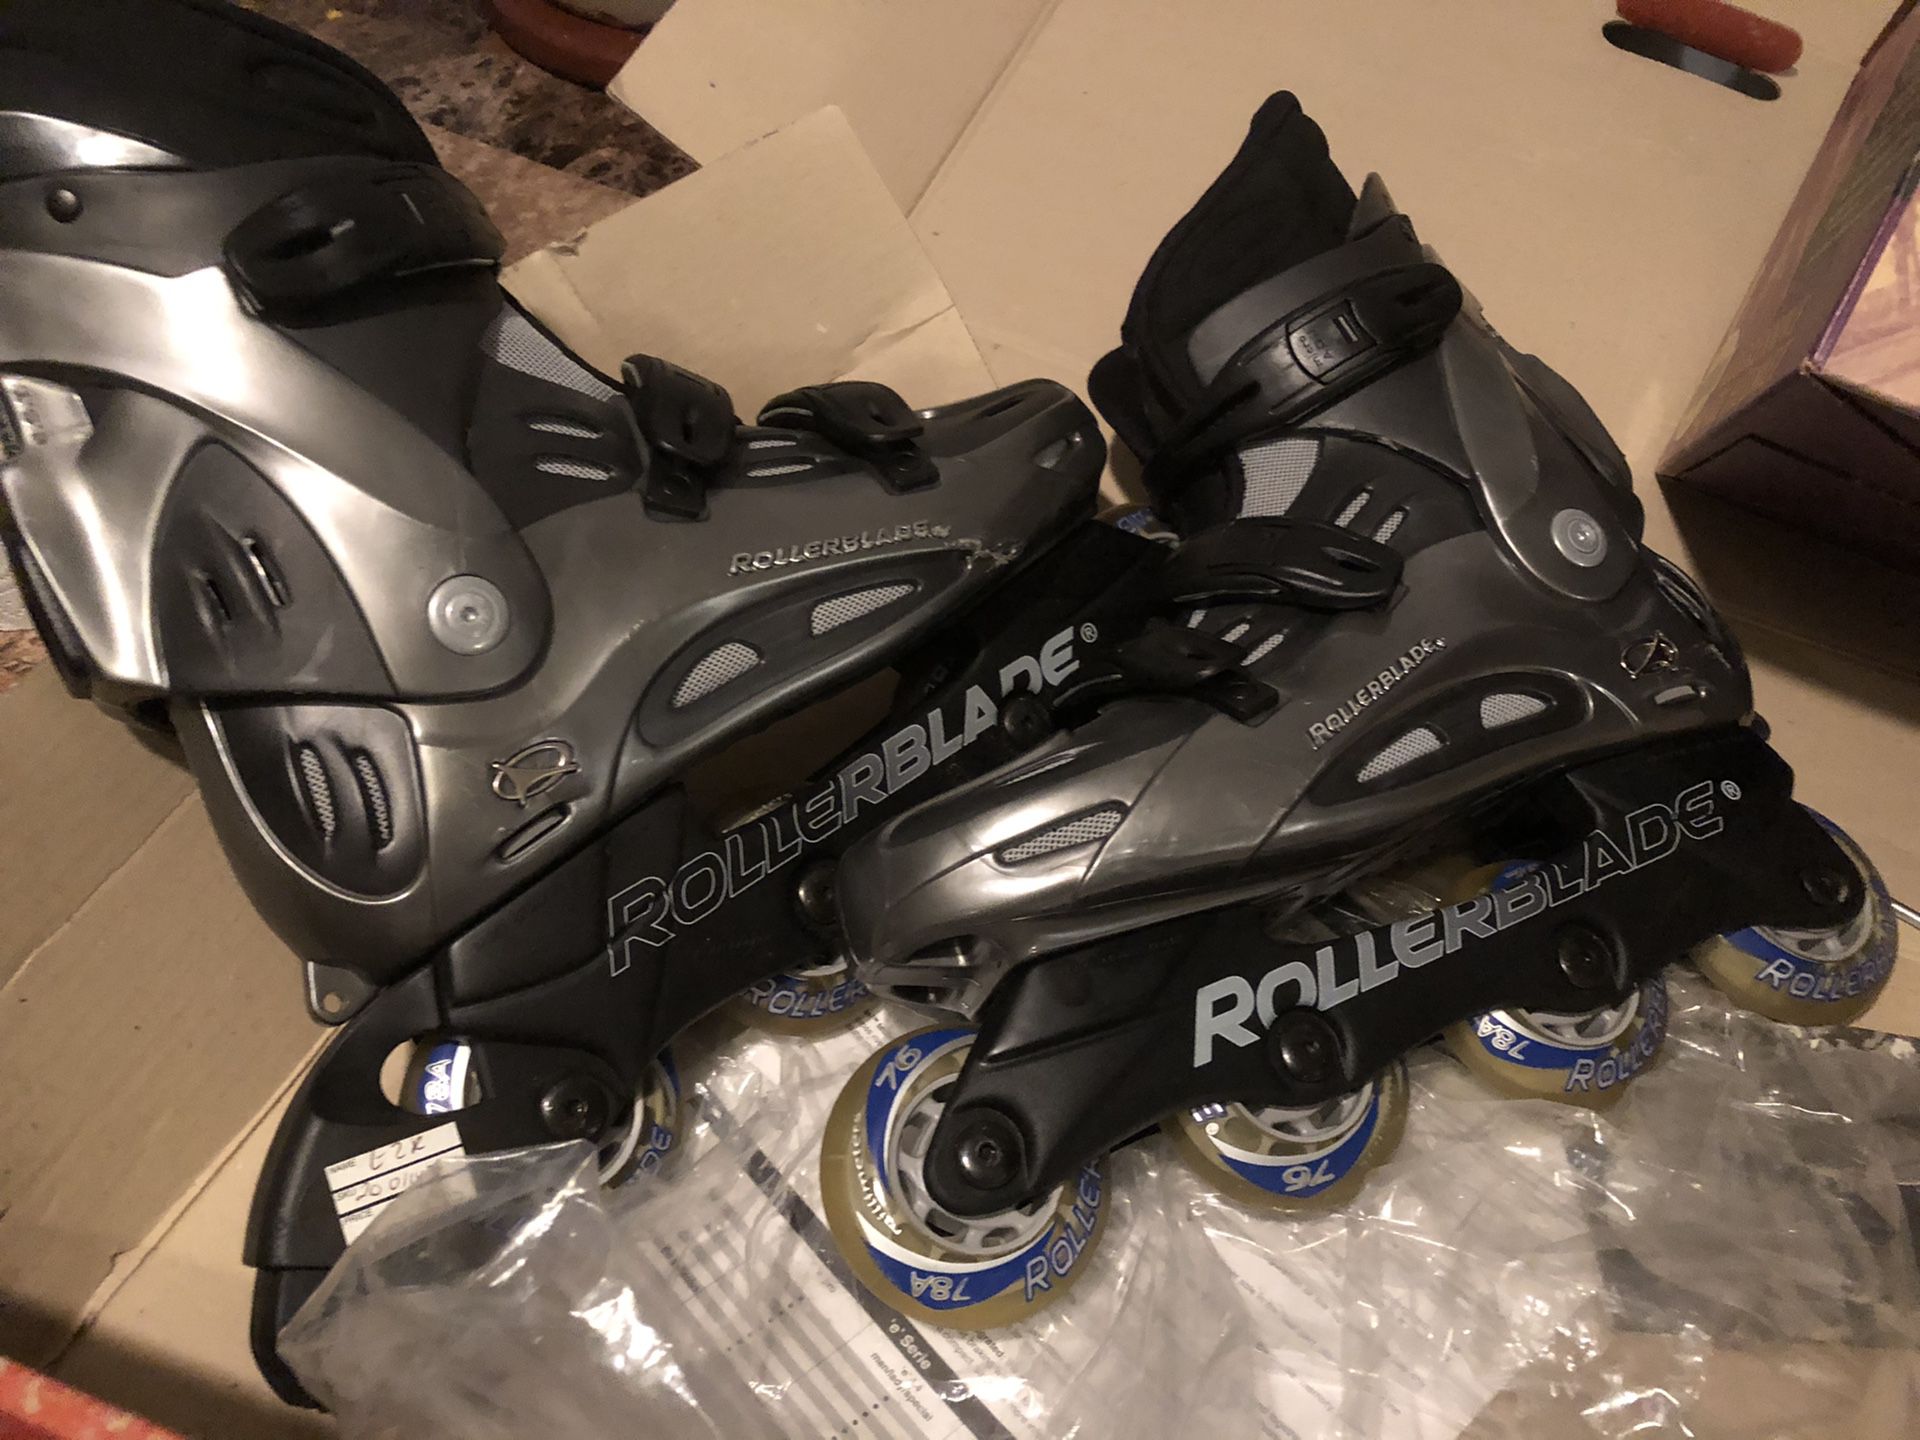 Rollers Blades brand new and safety skate helmet